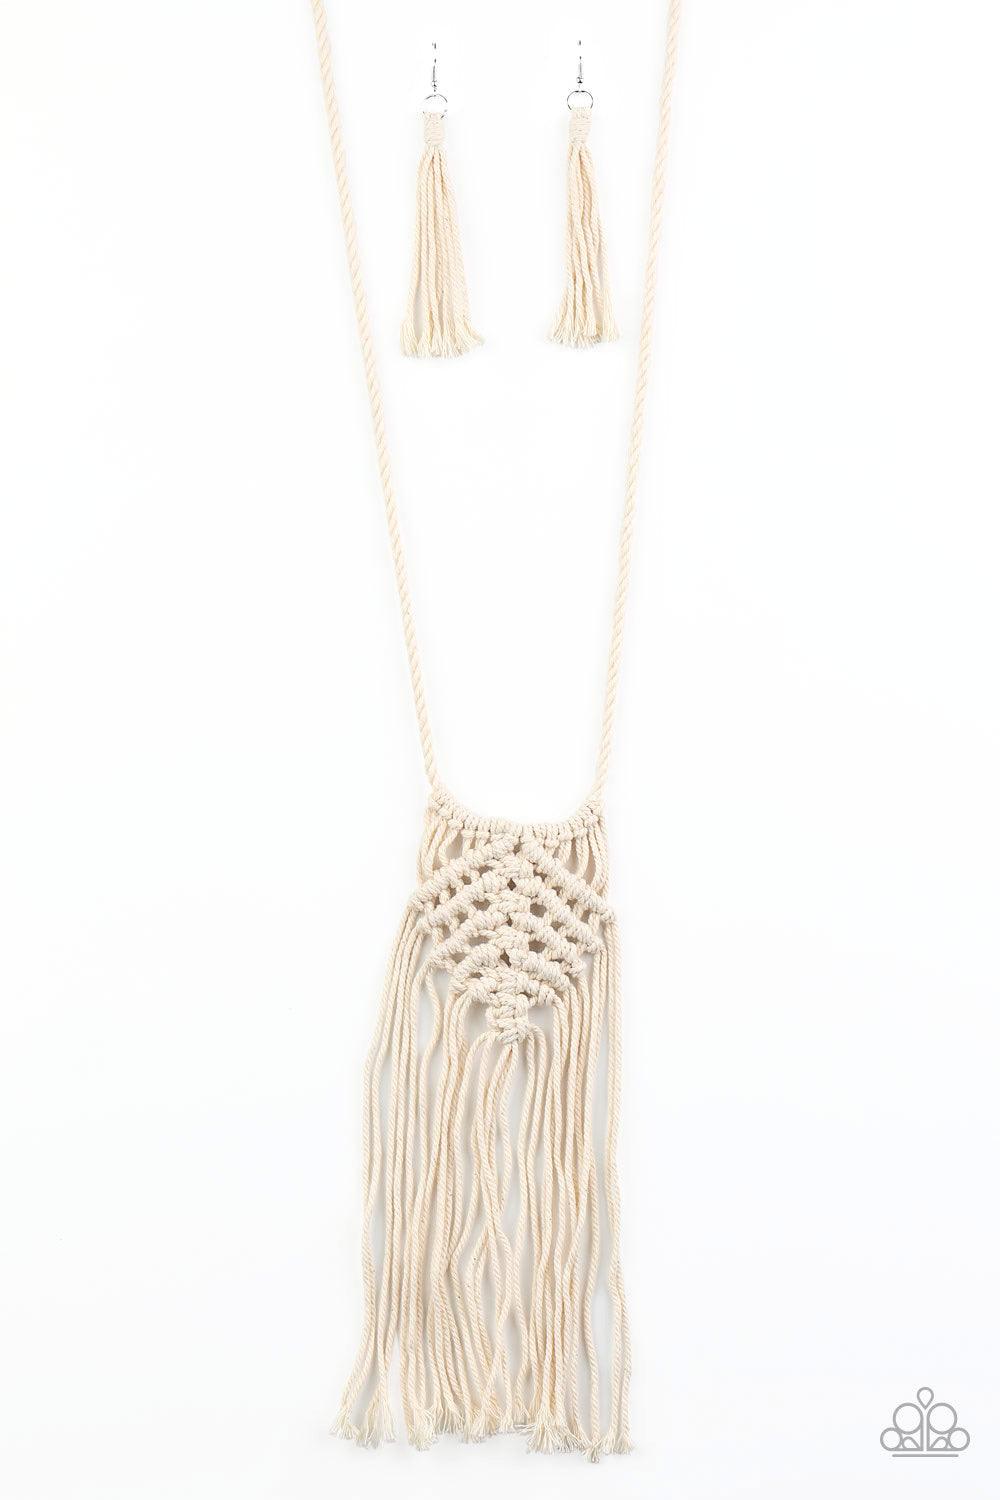 Paparazzi Accessories Macrame Mantra - White Soft twine-like cording decoratively knots into a macramé inspired pendant at the bottom of lengthened strands of twisted cording. Featuring frayed ends, excess cording streams from the bottom of the knotted ce